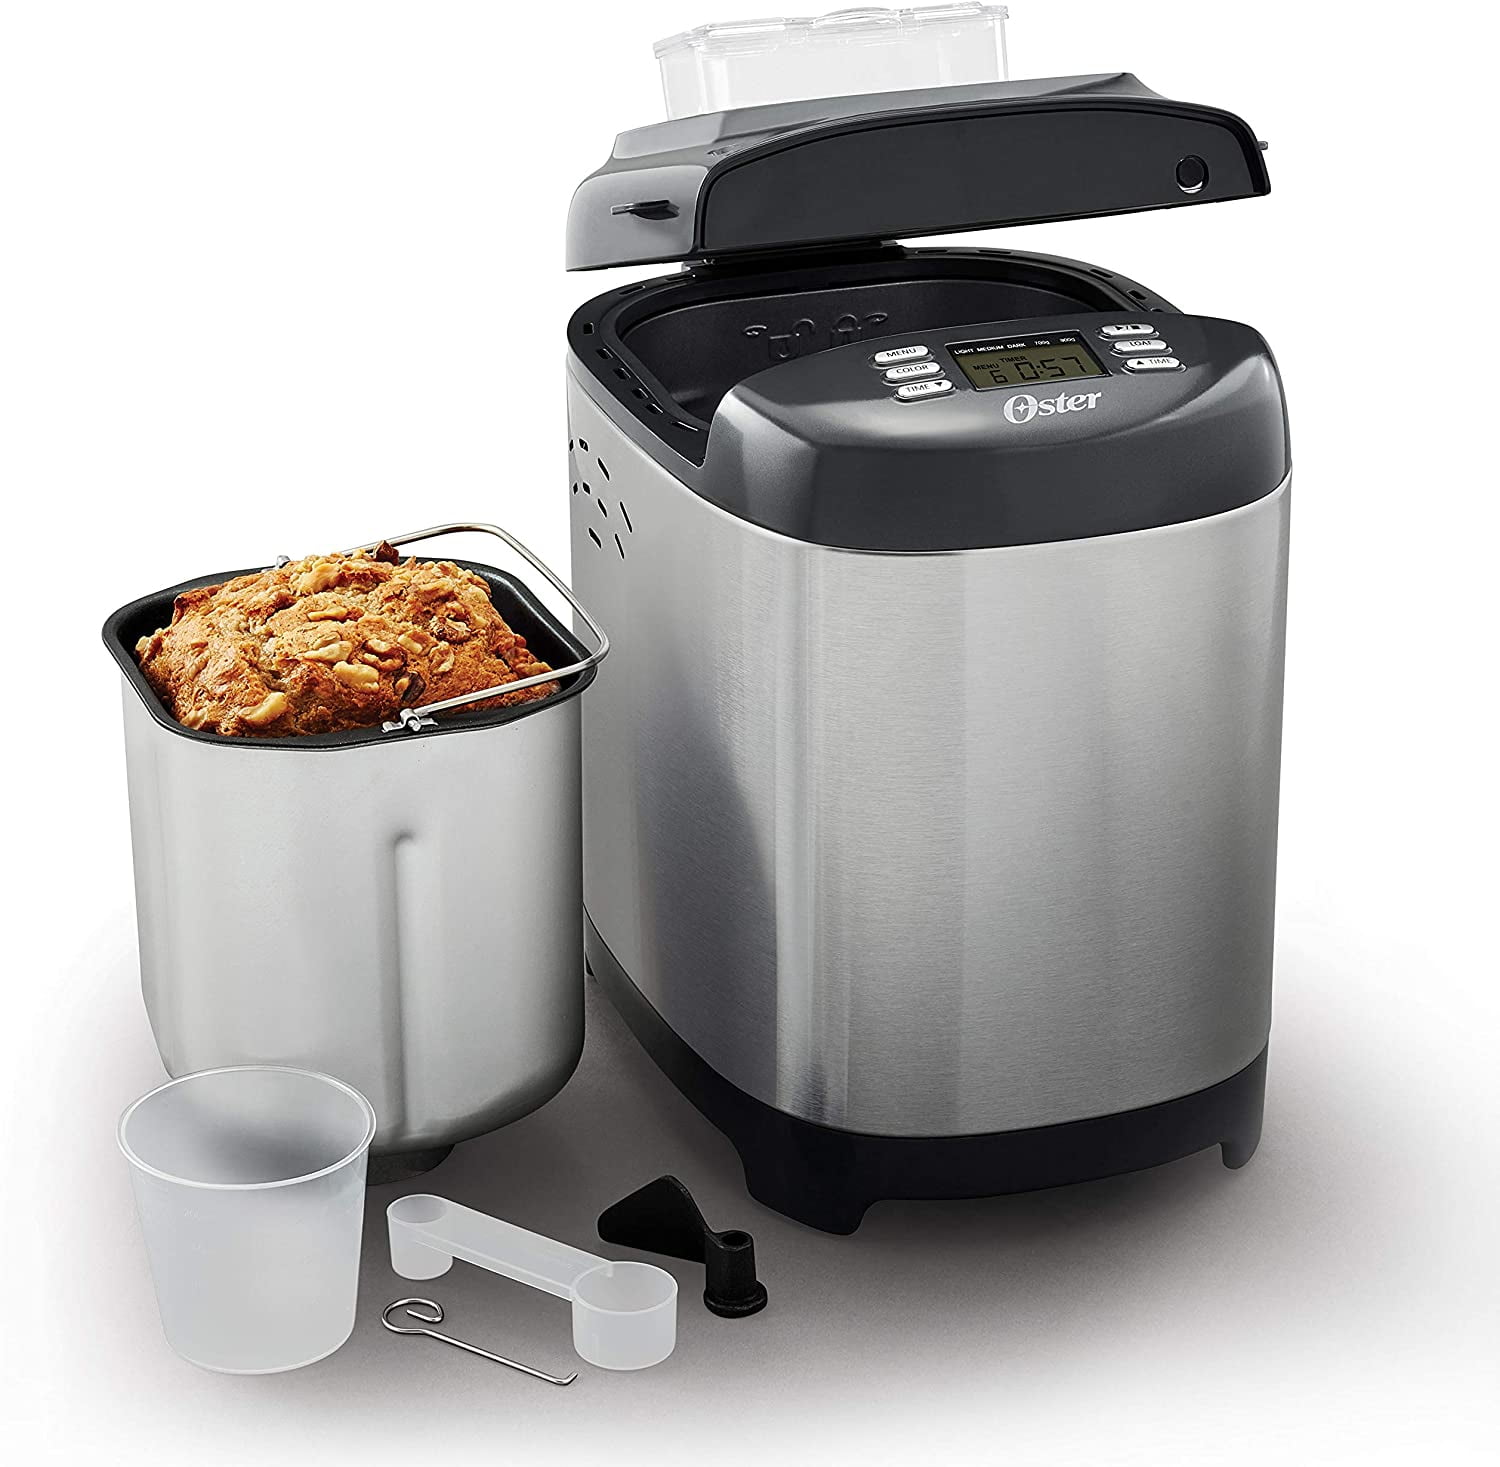 Oster® Bread Maker with ExpressBake® | 2 Pound Capacity - Walmart.com